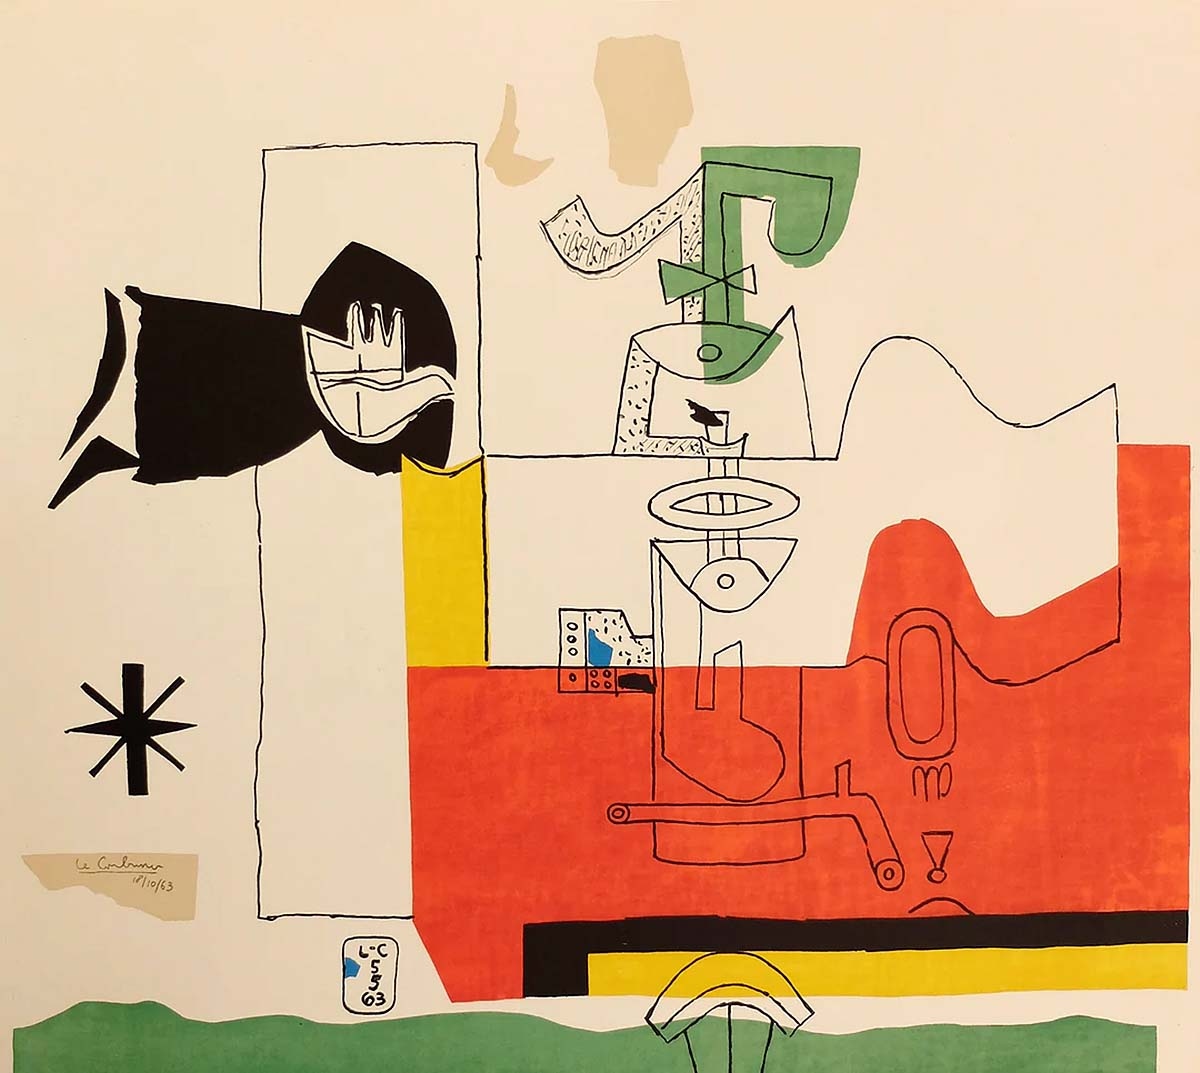 Le Corbusier is among the names whose work appears in an exhibition hosted in collaboration with the RIAS at Edinburgh’s @TENedinburgh.
artmag.co.uk/rias-royalty-a…
Image © estate of the artist.
#artmag #scottishart #scottishgalleries #scottishartonline #scottishpainting